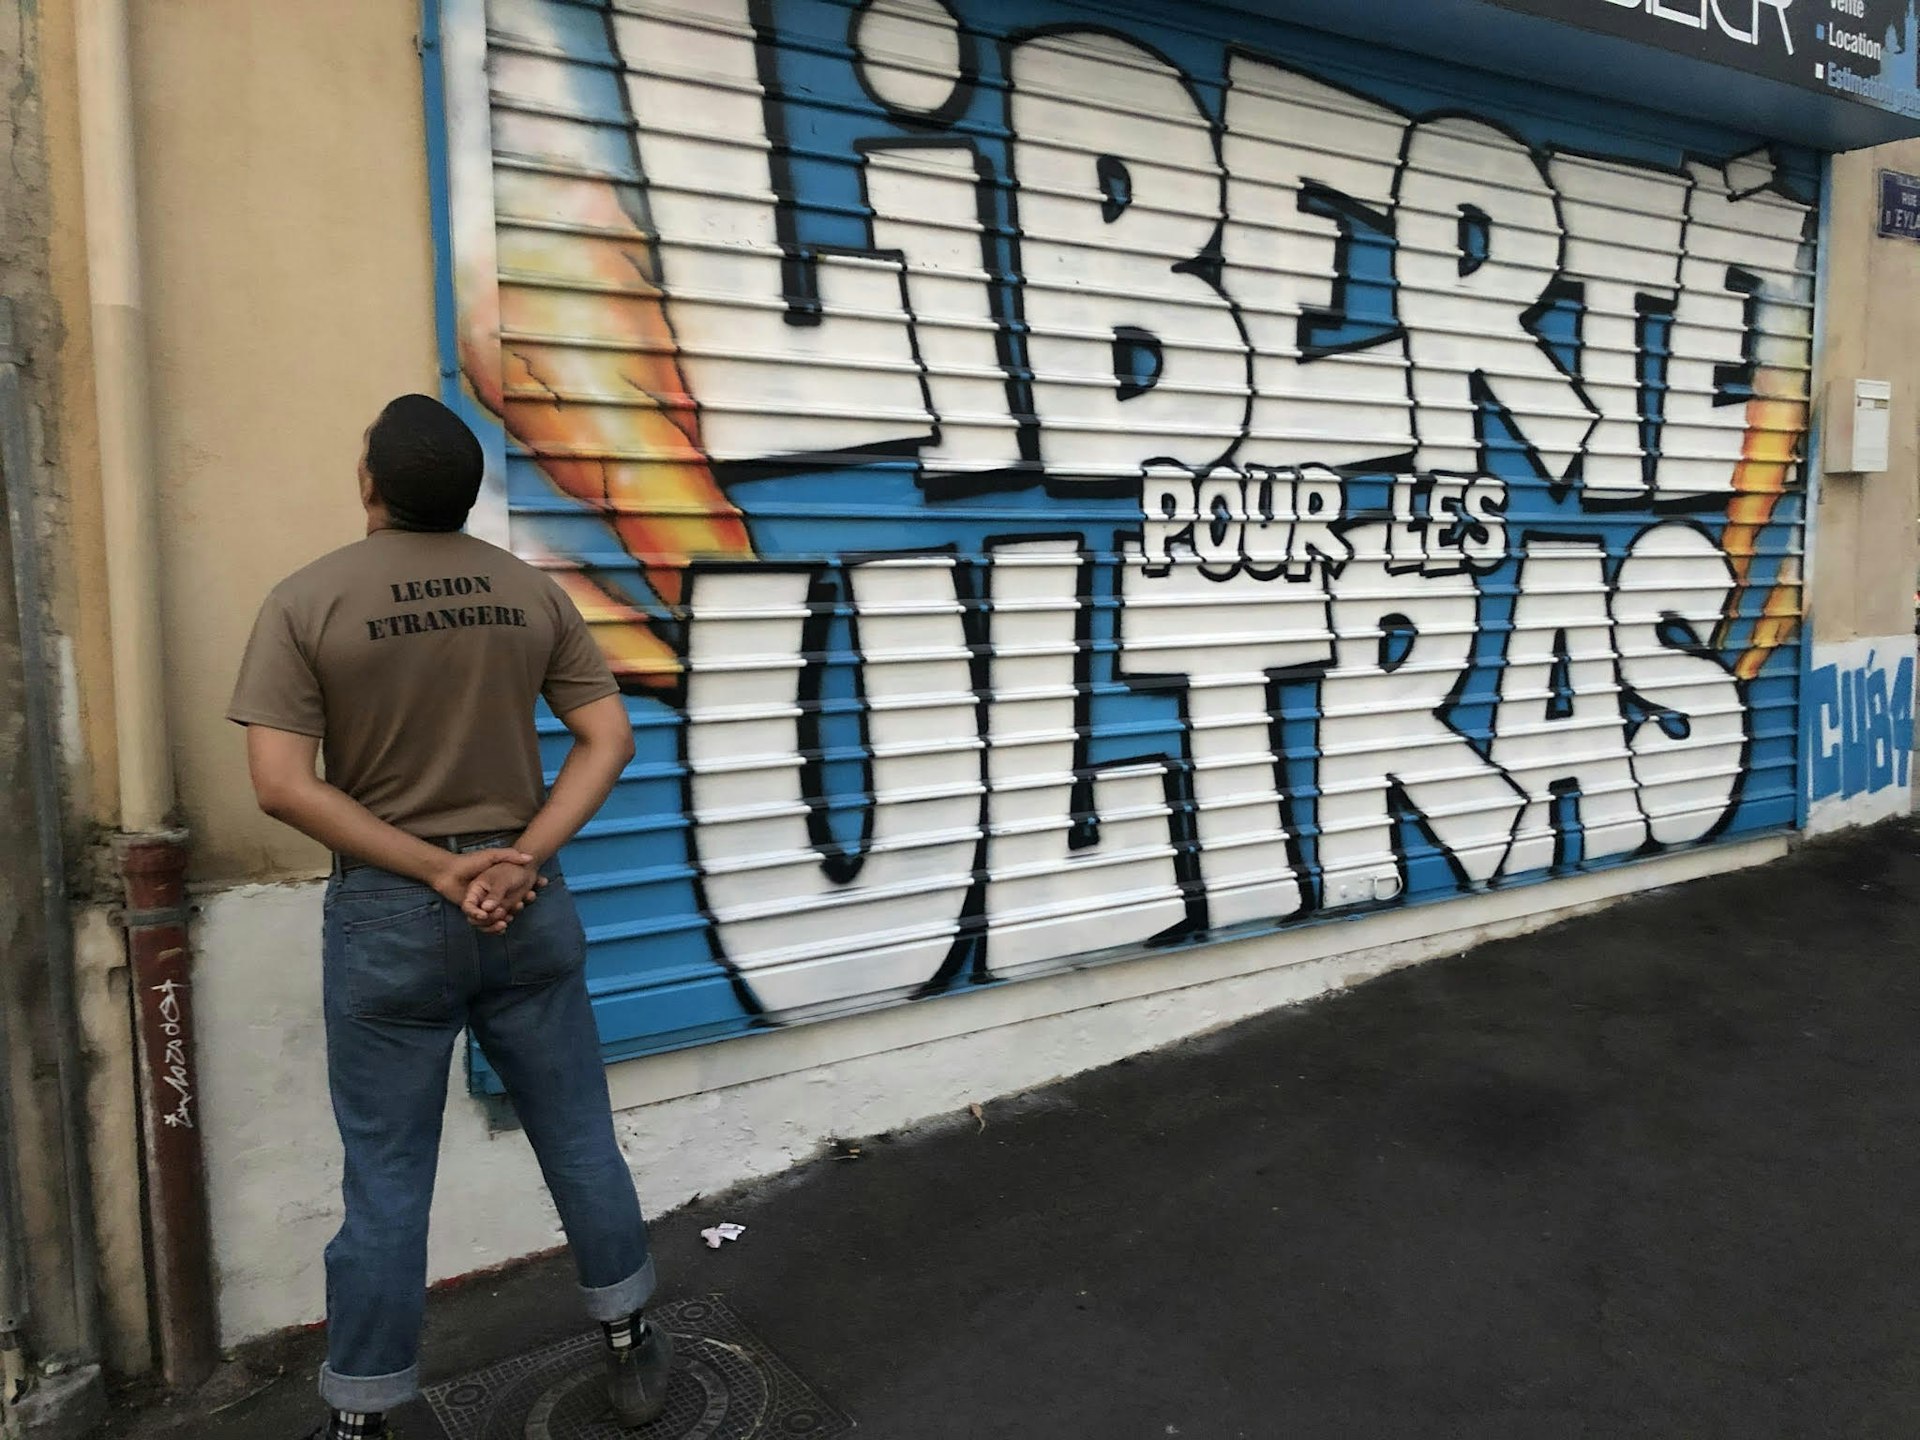 A man standing with his back turned, looking at graffiti that says "Liberté pour les Ultras"